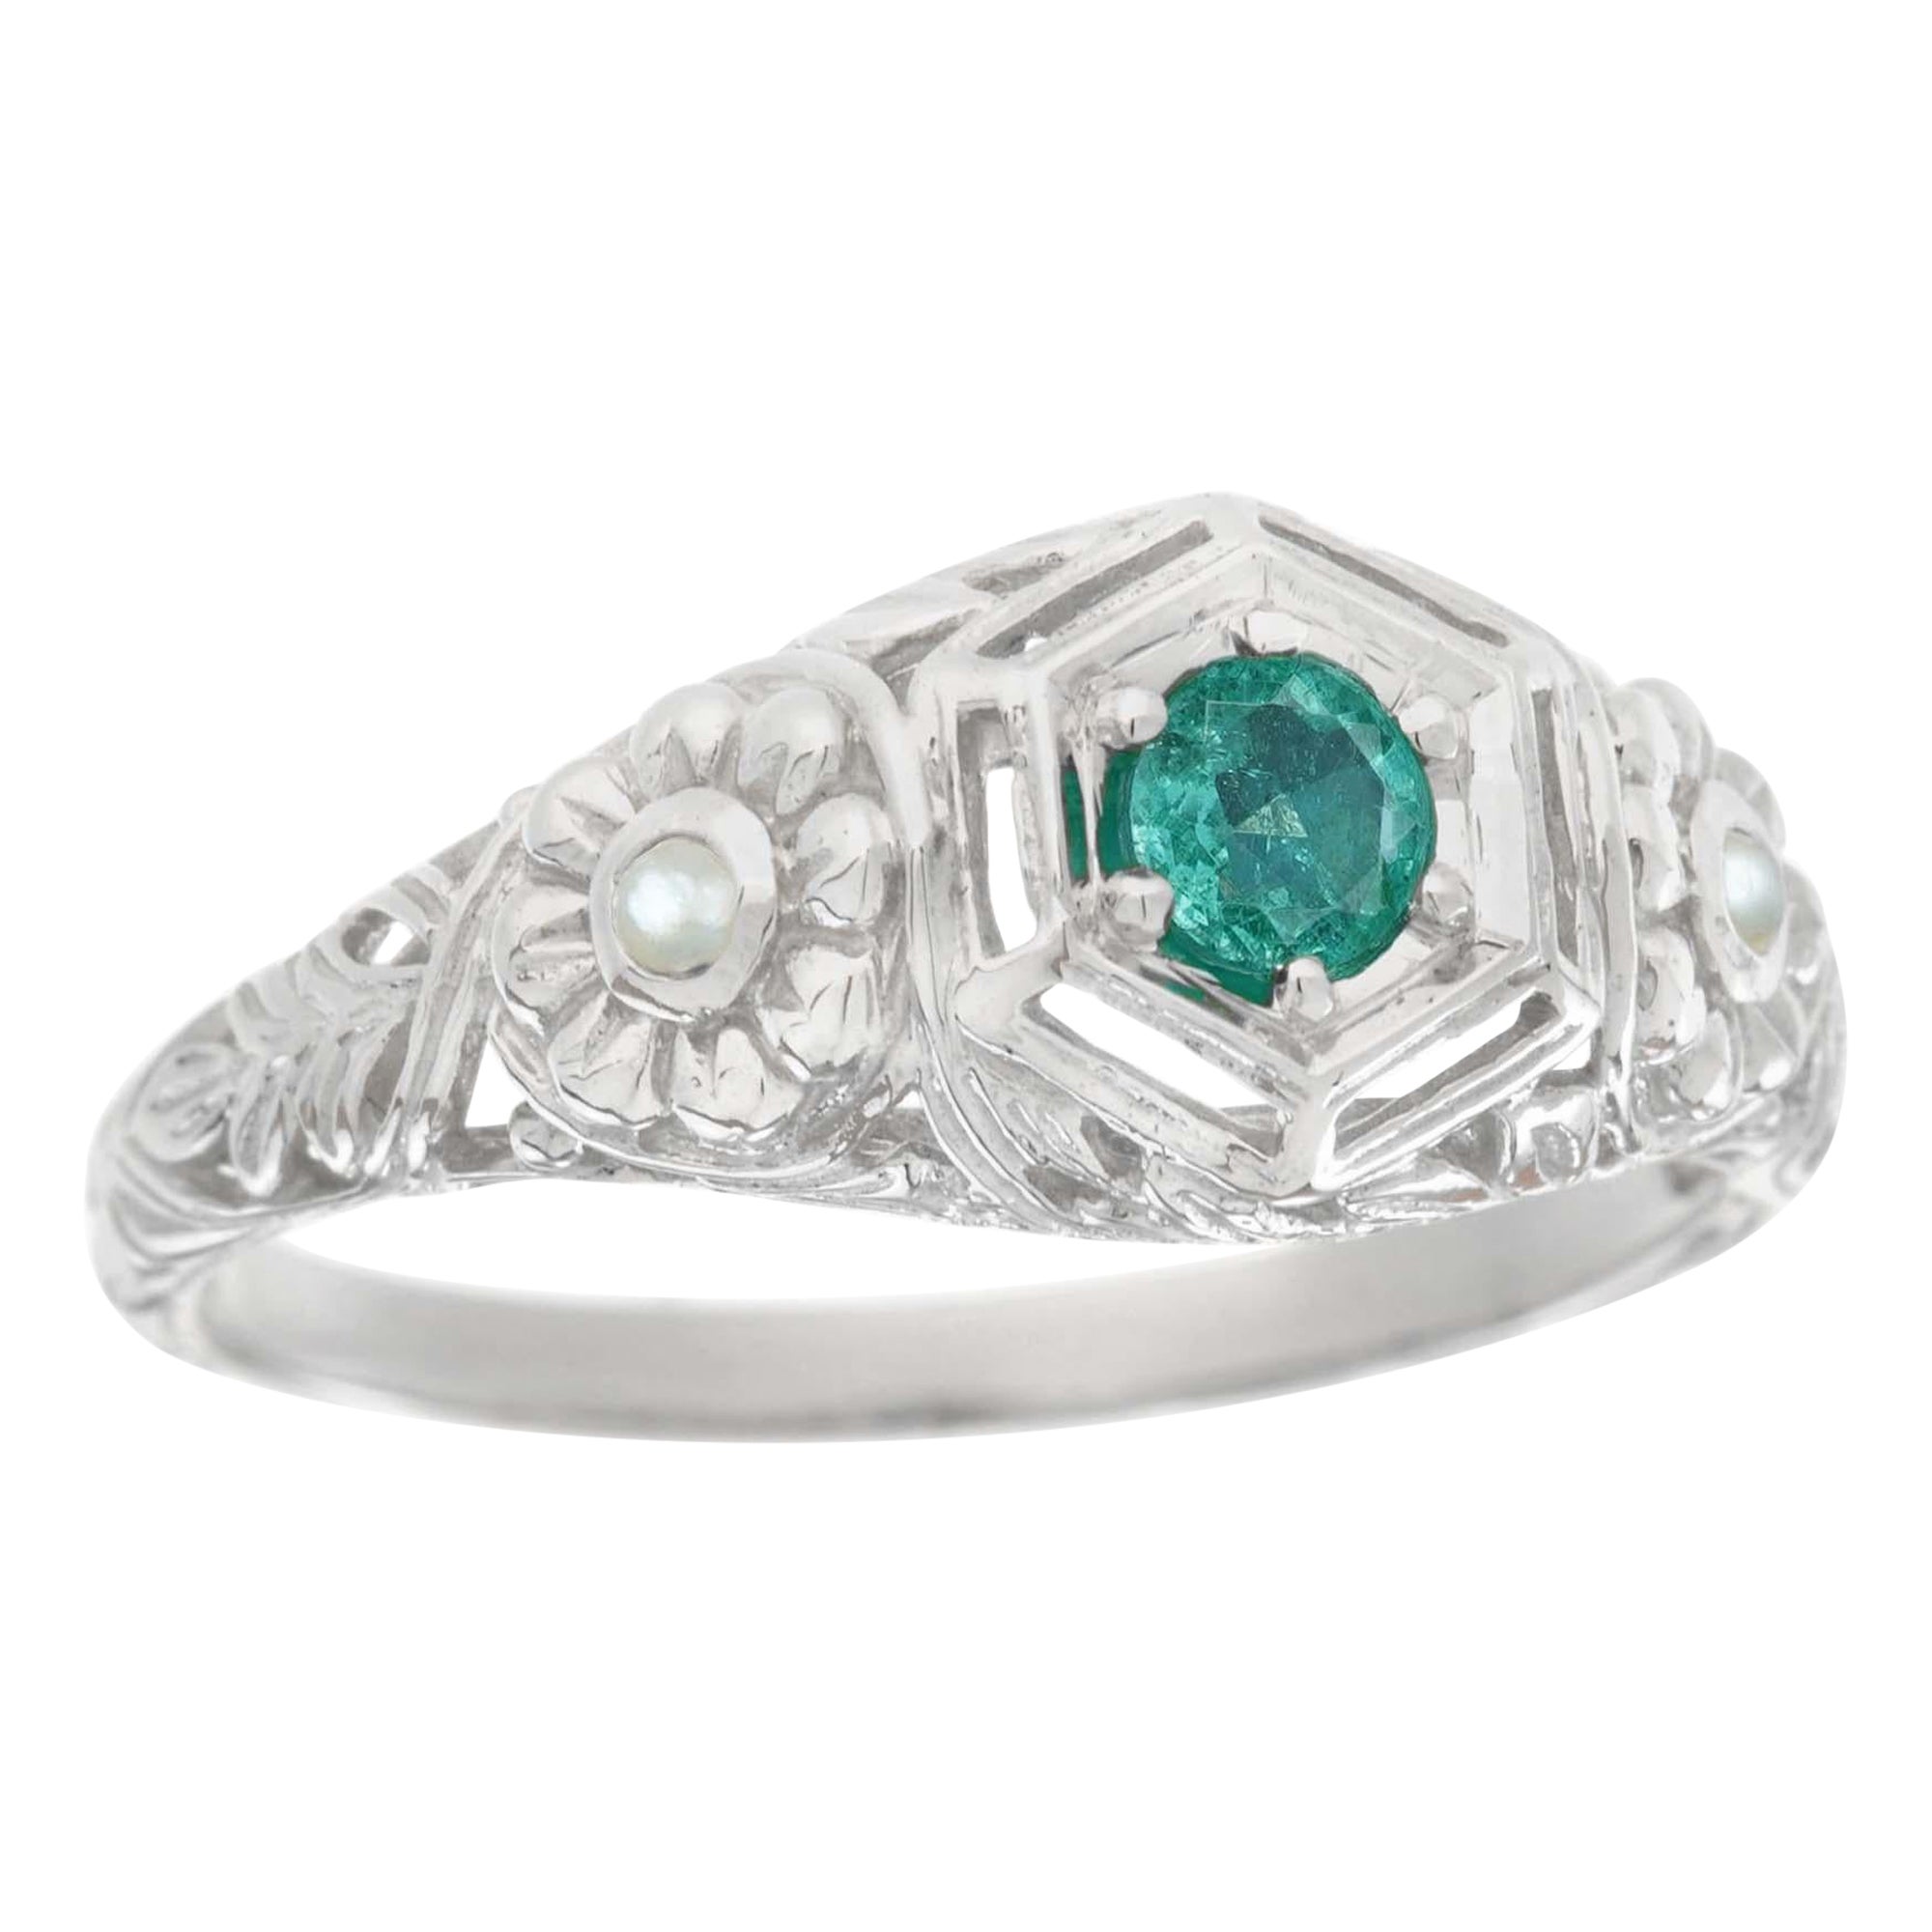 For Sale:  Natural Emerald Pearl Floral Filigree Ring in Solid 9K White Gold